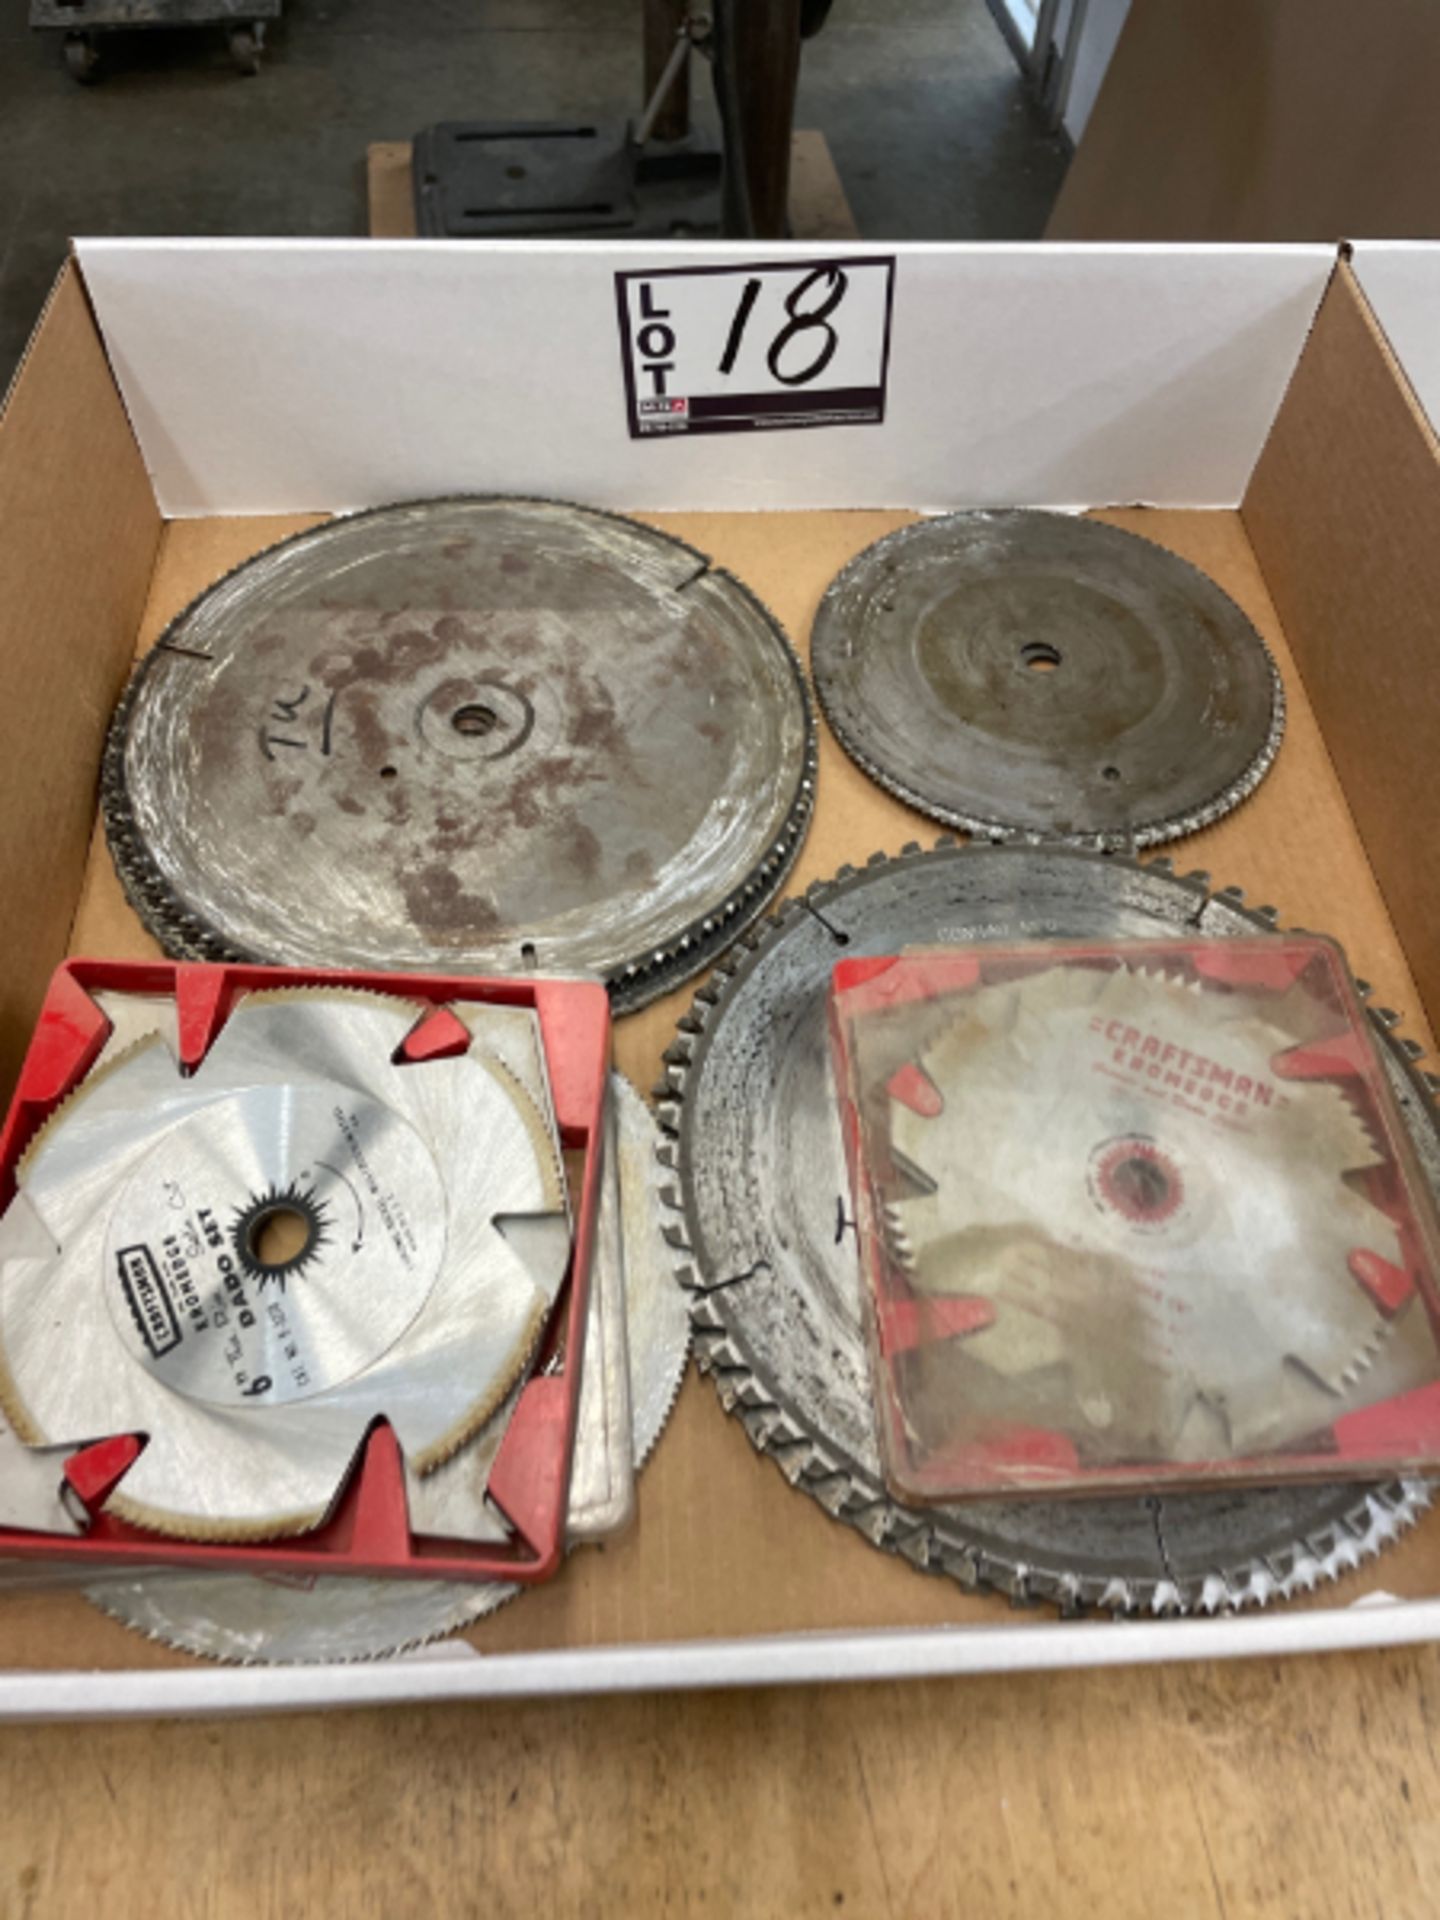 (2) Boxes of Saw Blades